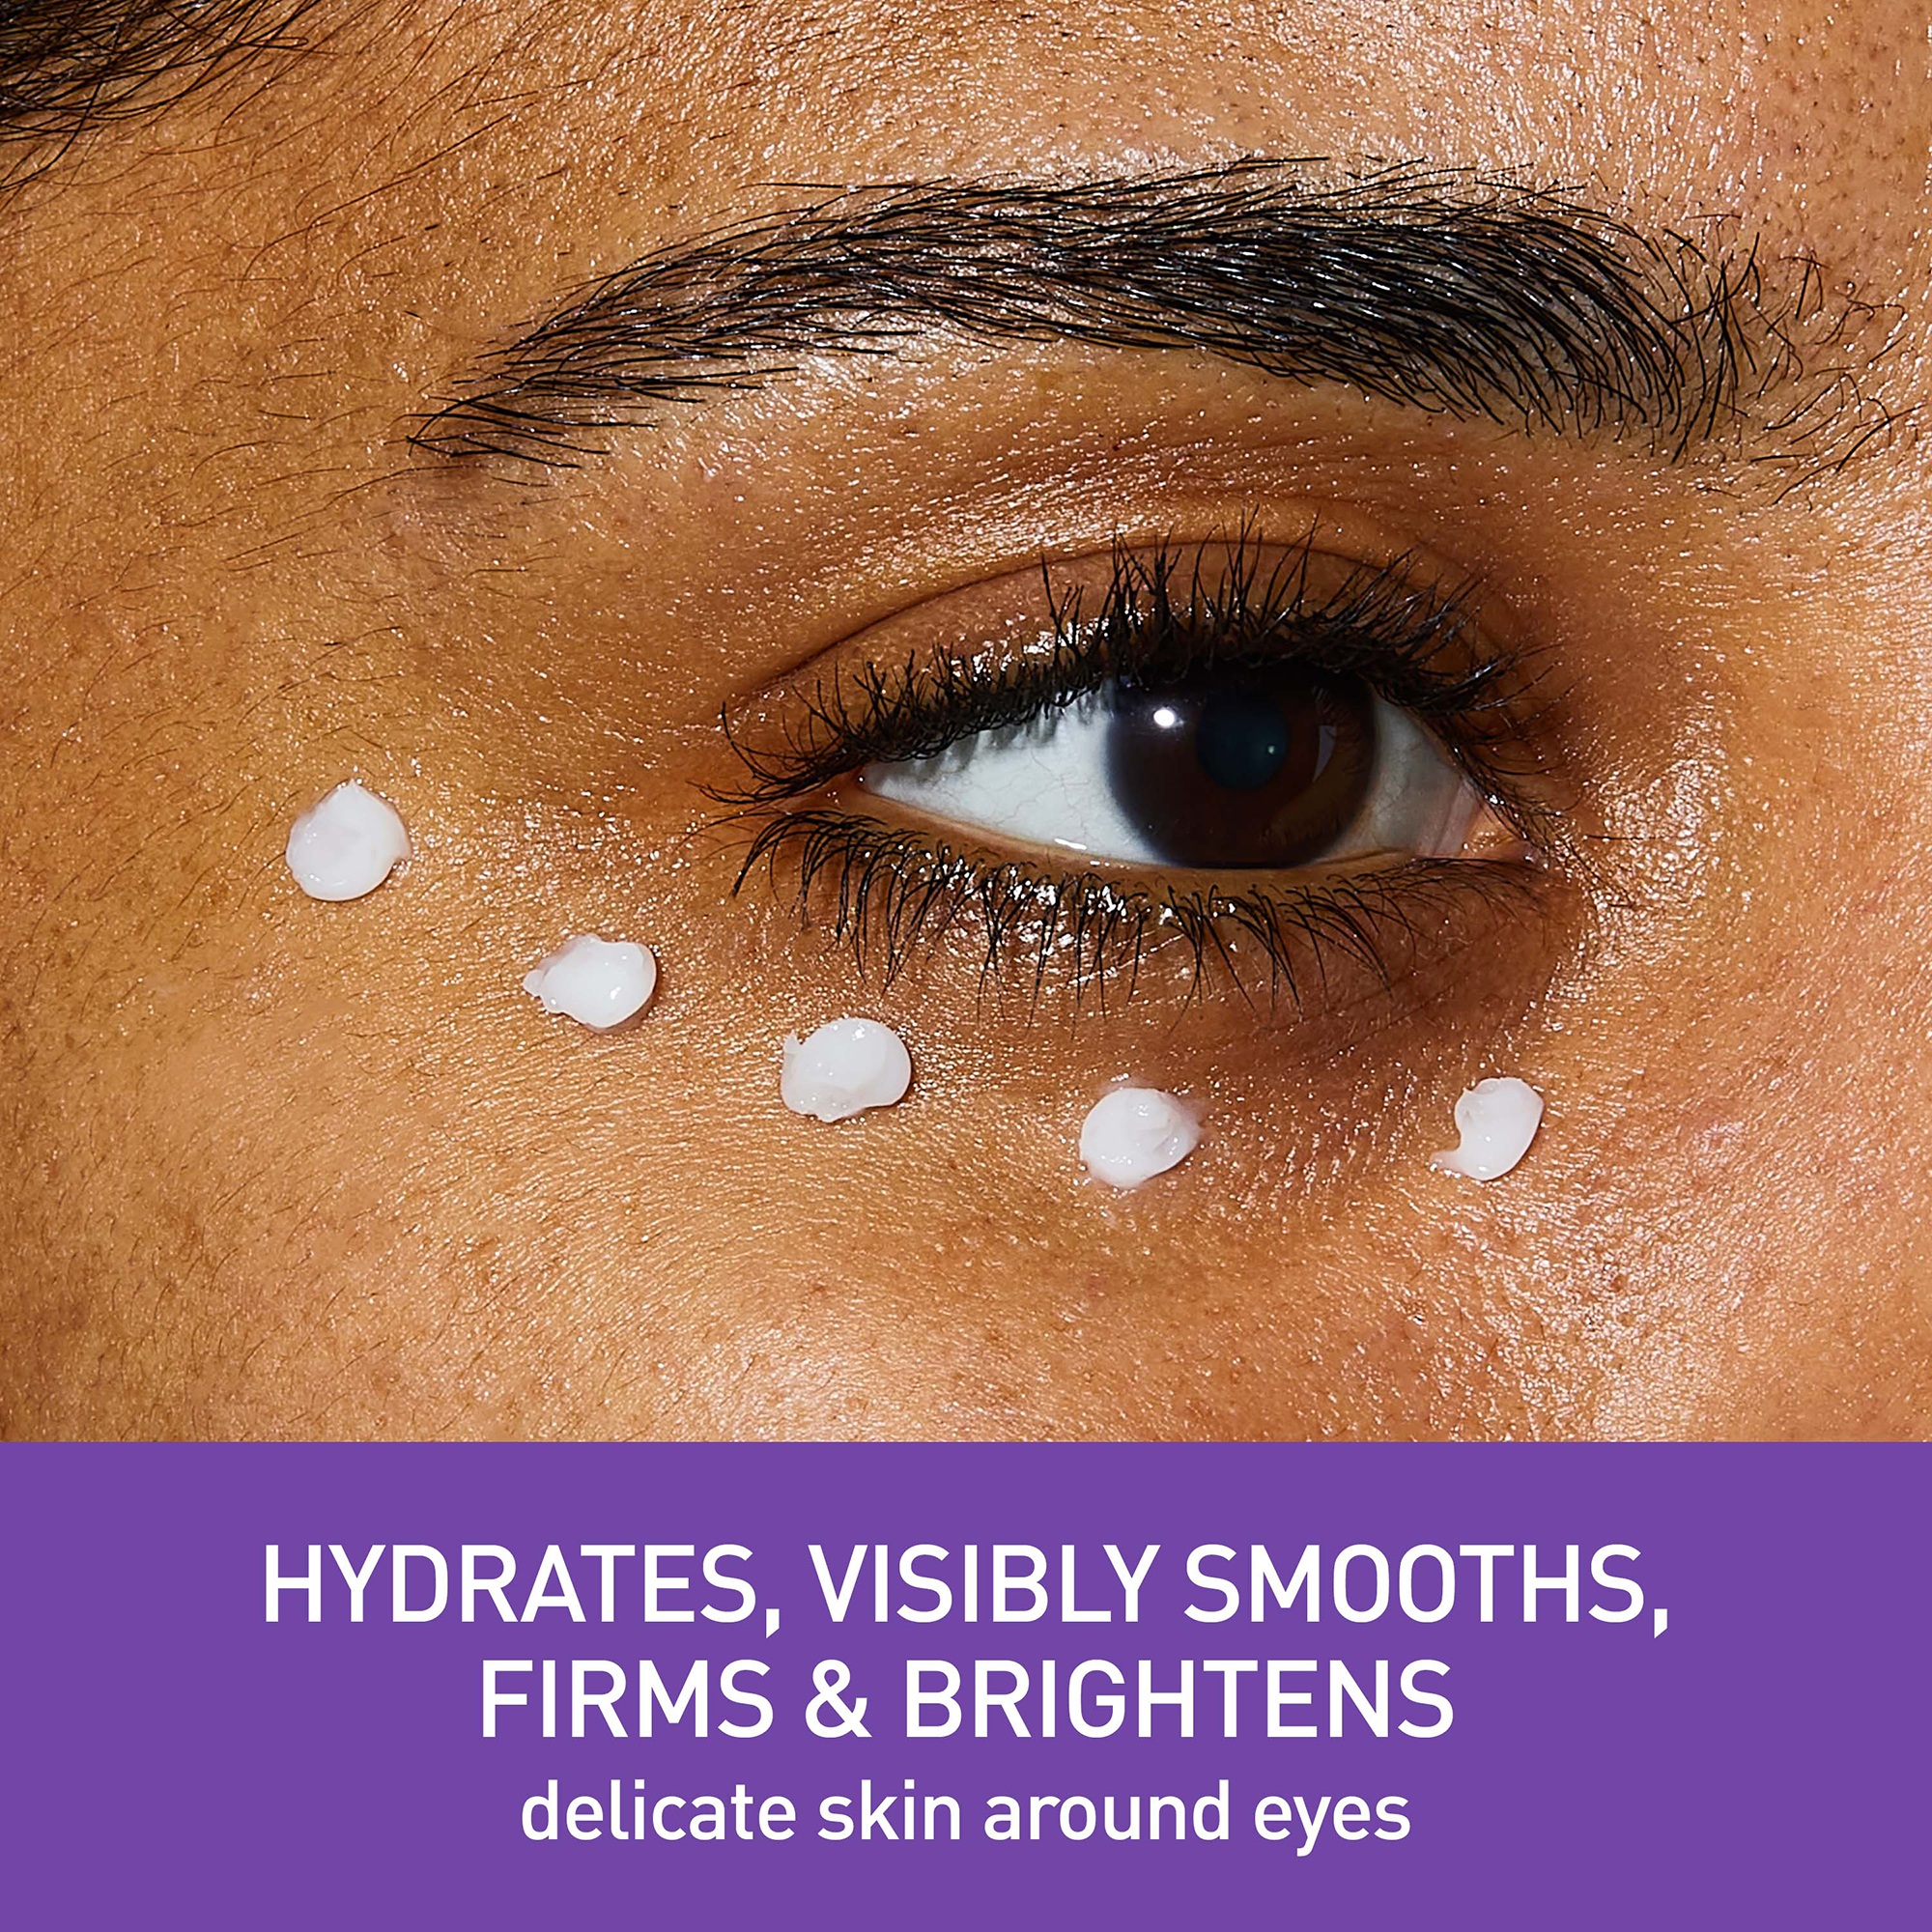 Image 1, hydrates, visibly smooths, firms and brightens delicate skin around eyes